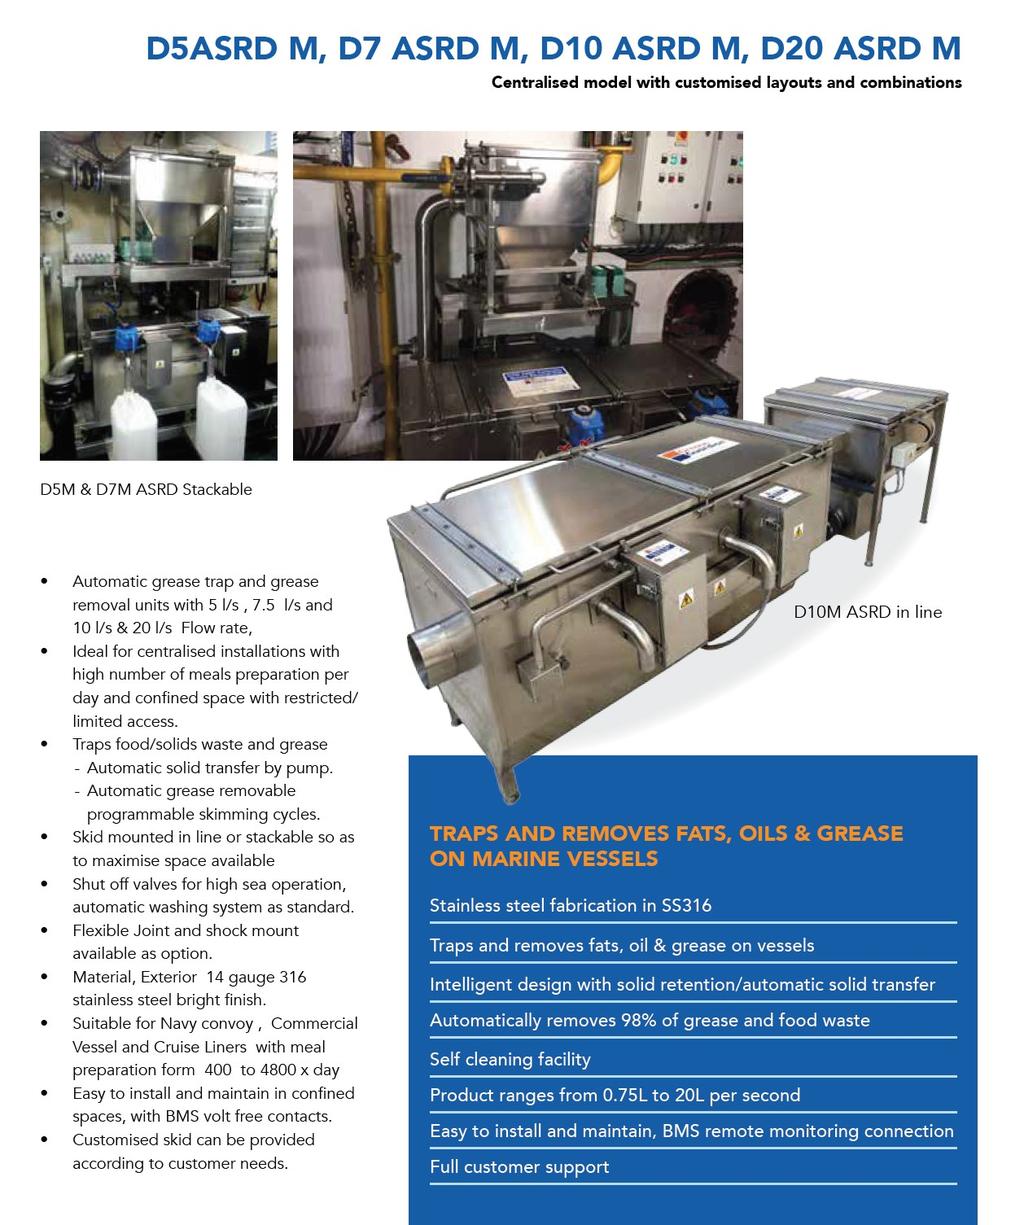 D5 SRD M, D7 ASRD M, D10 ASRD M, D20 ASRD M Centralized models with customized combinations Features Automatic grease trap and grease removal units with 75 GPM 120 GPM, 160 GPM and 320 GPM flow rates